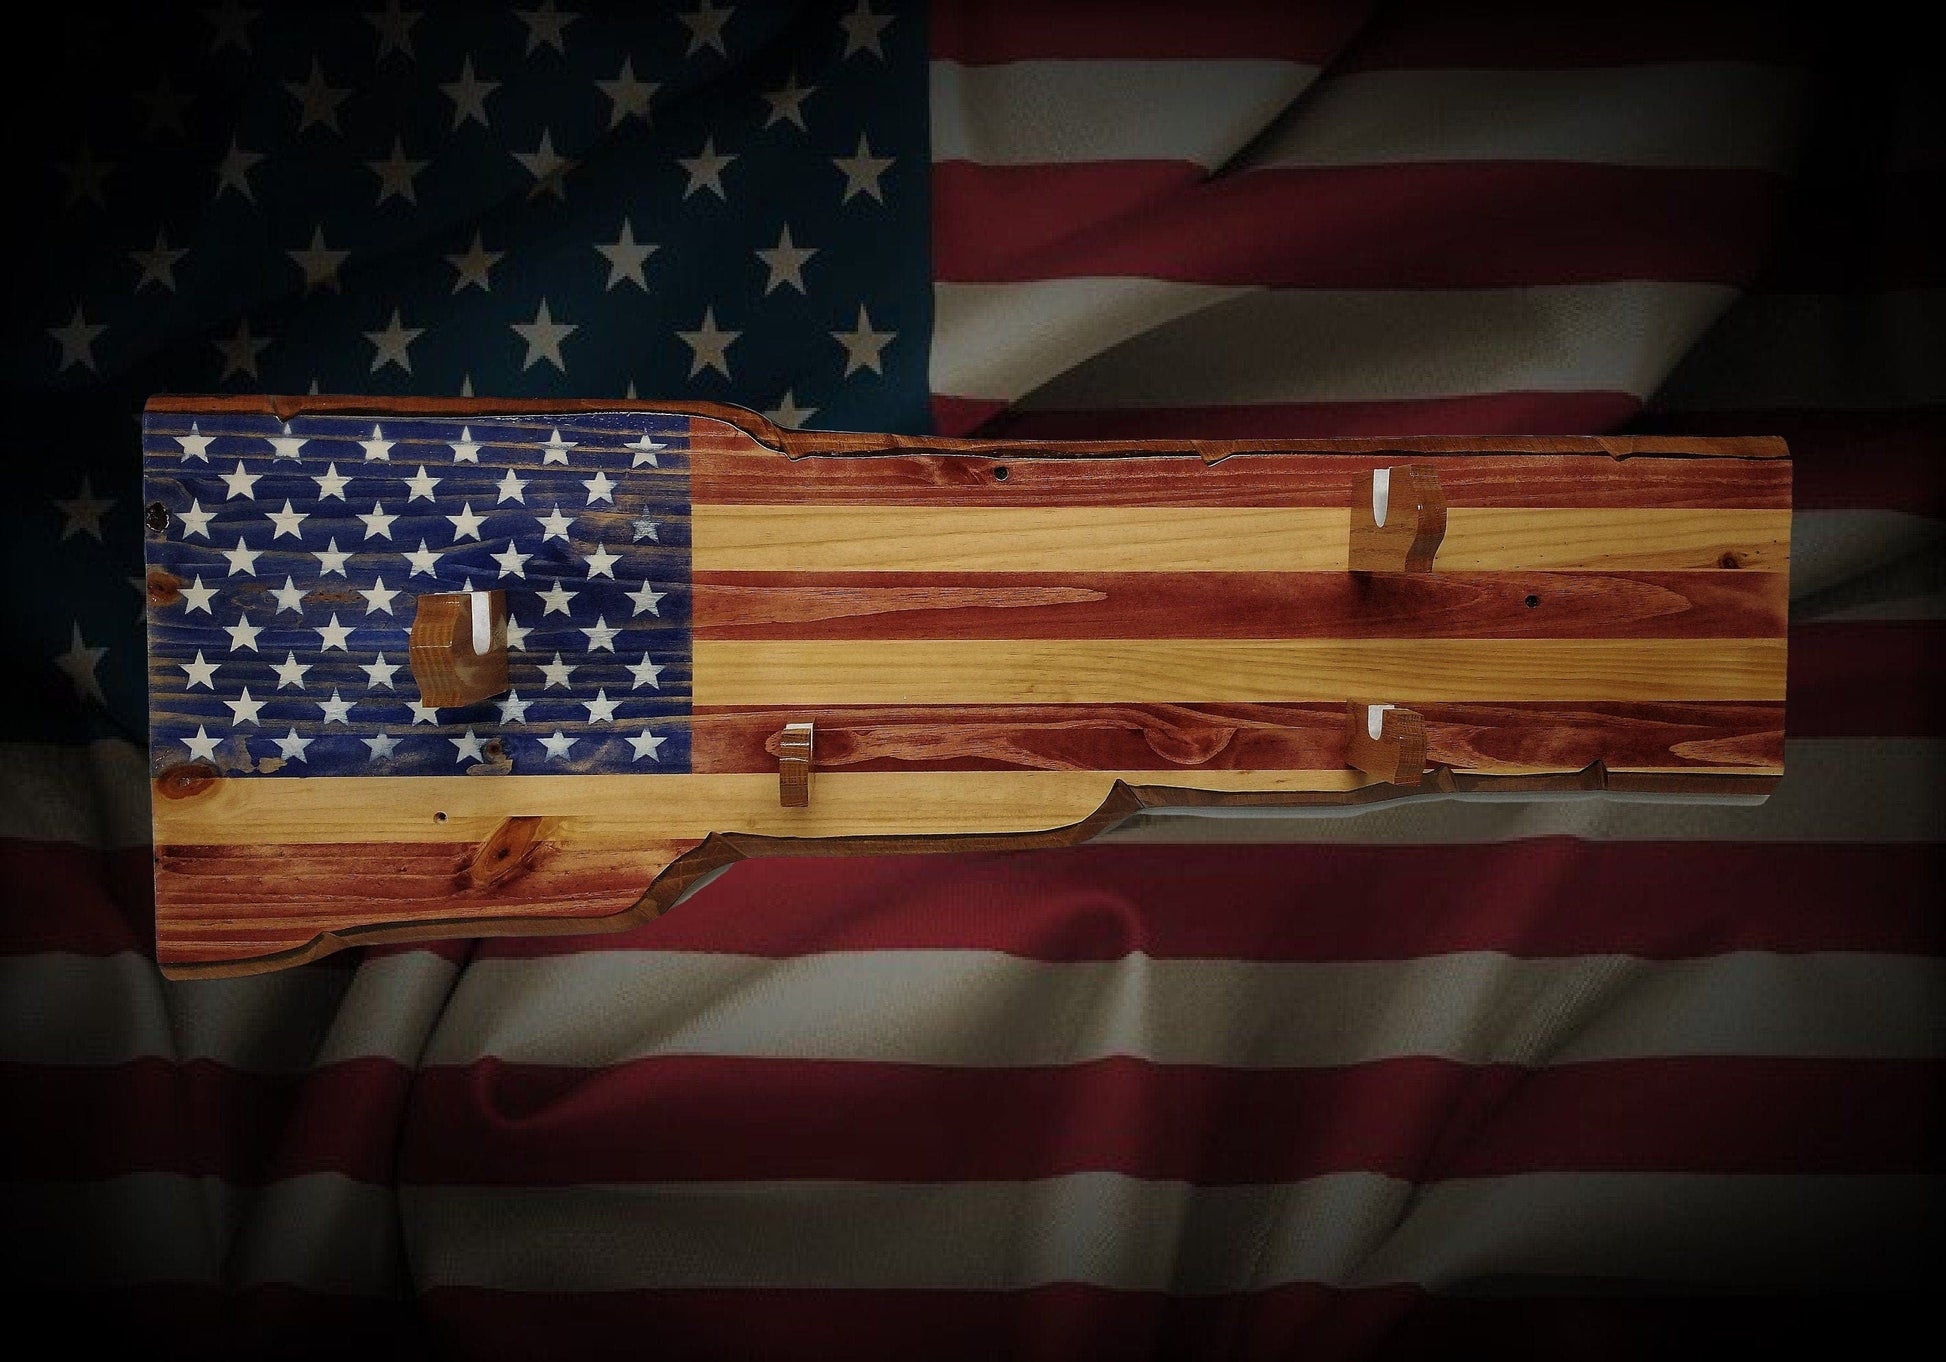 walkerwoodgifts Rustic Old Glory Sword And Gun Rack Display Combination, Designed for Lever Action Rifle And Military Sword, Vintage Collector Gift